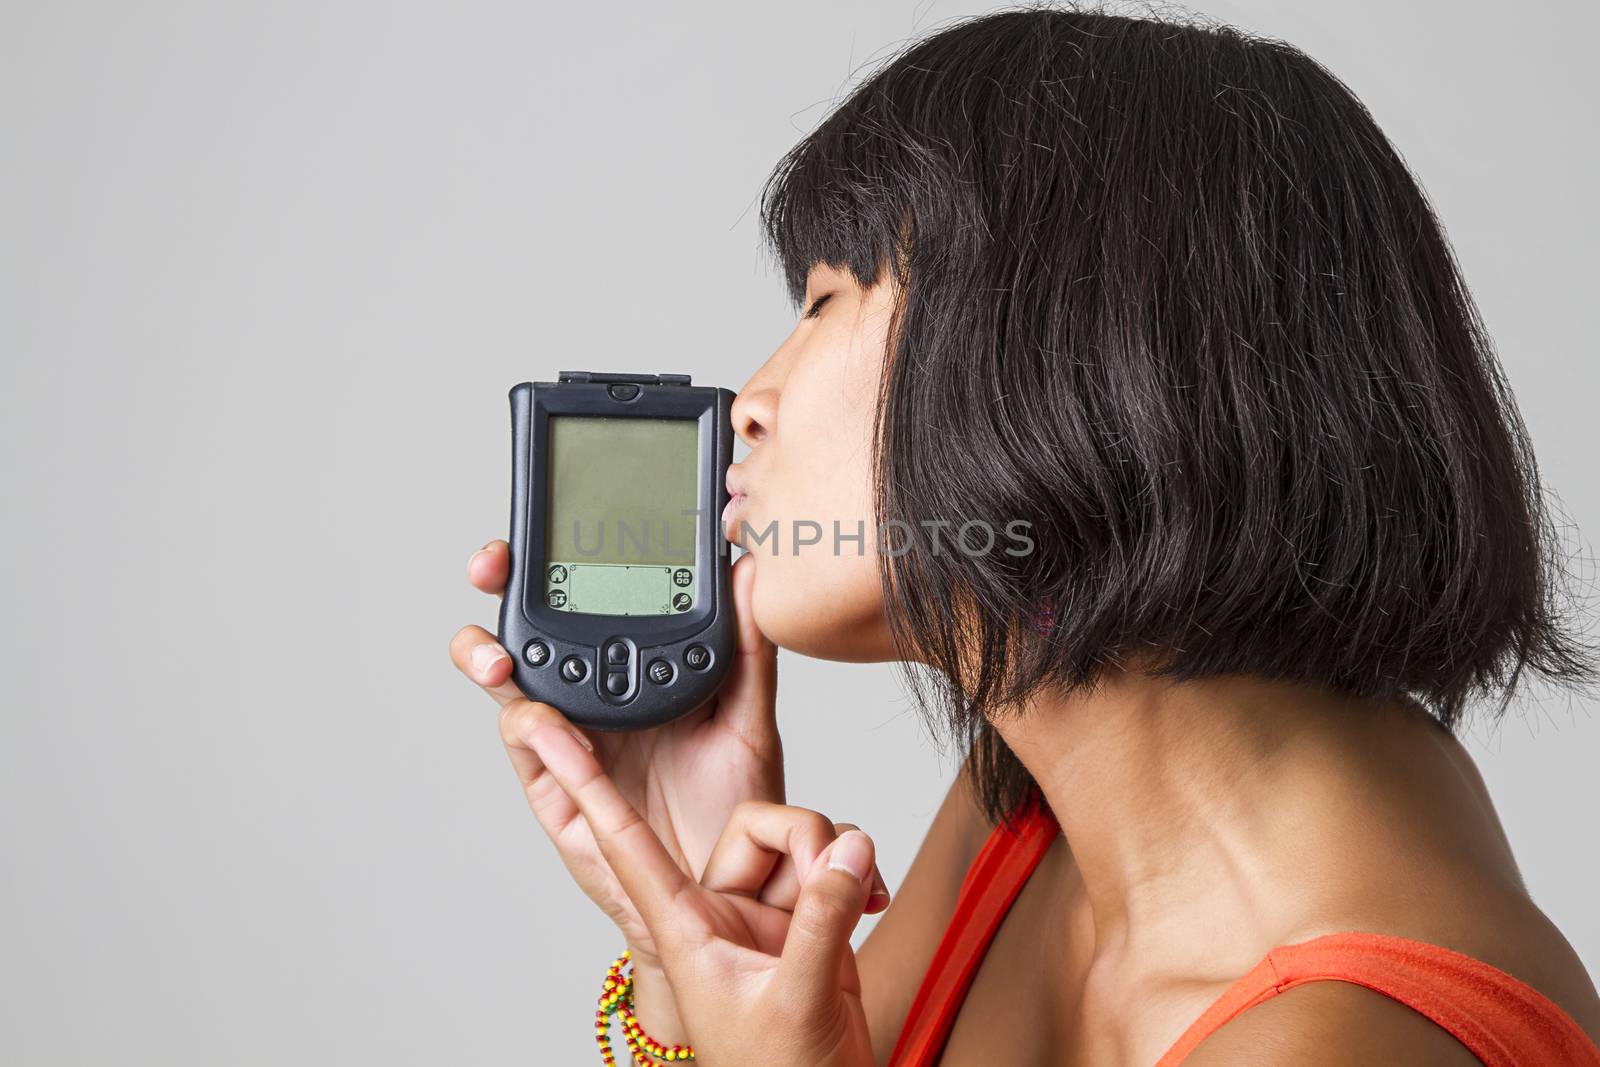 Philipino woman wearing a low cut orange dress kissing an old digital personnal assistant